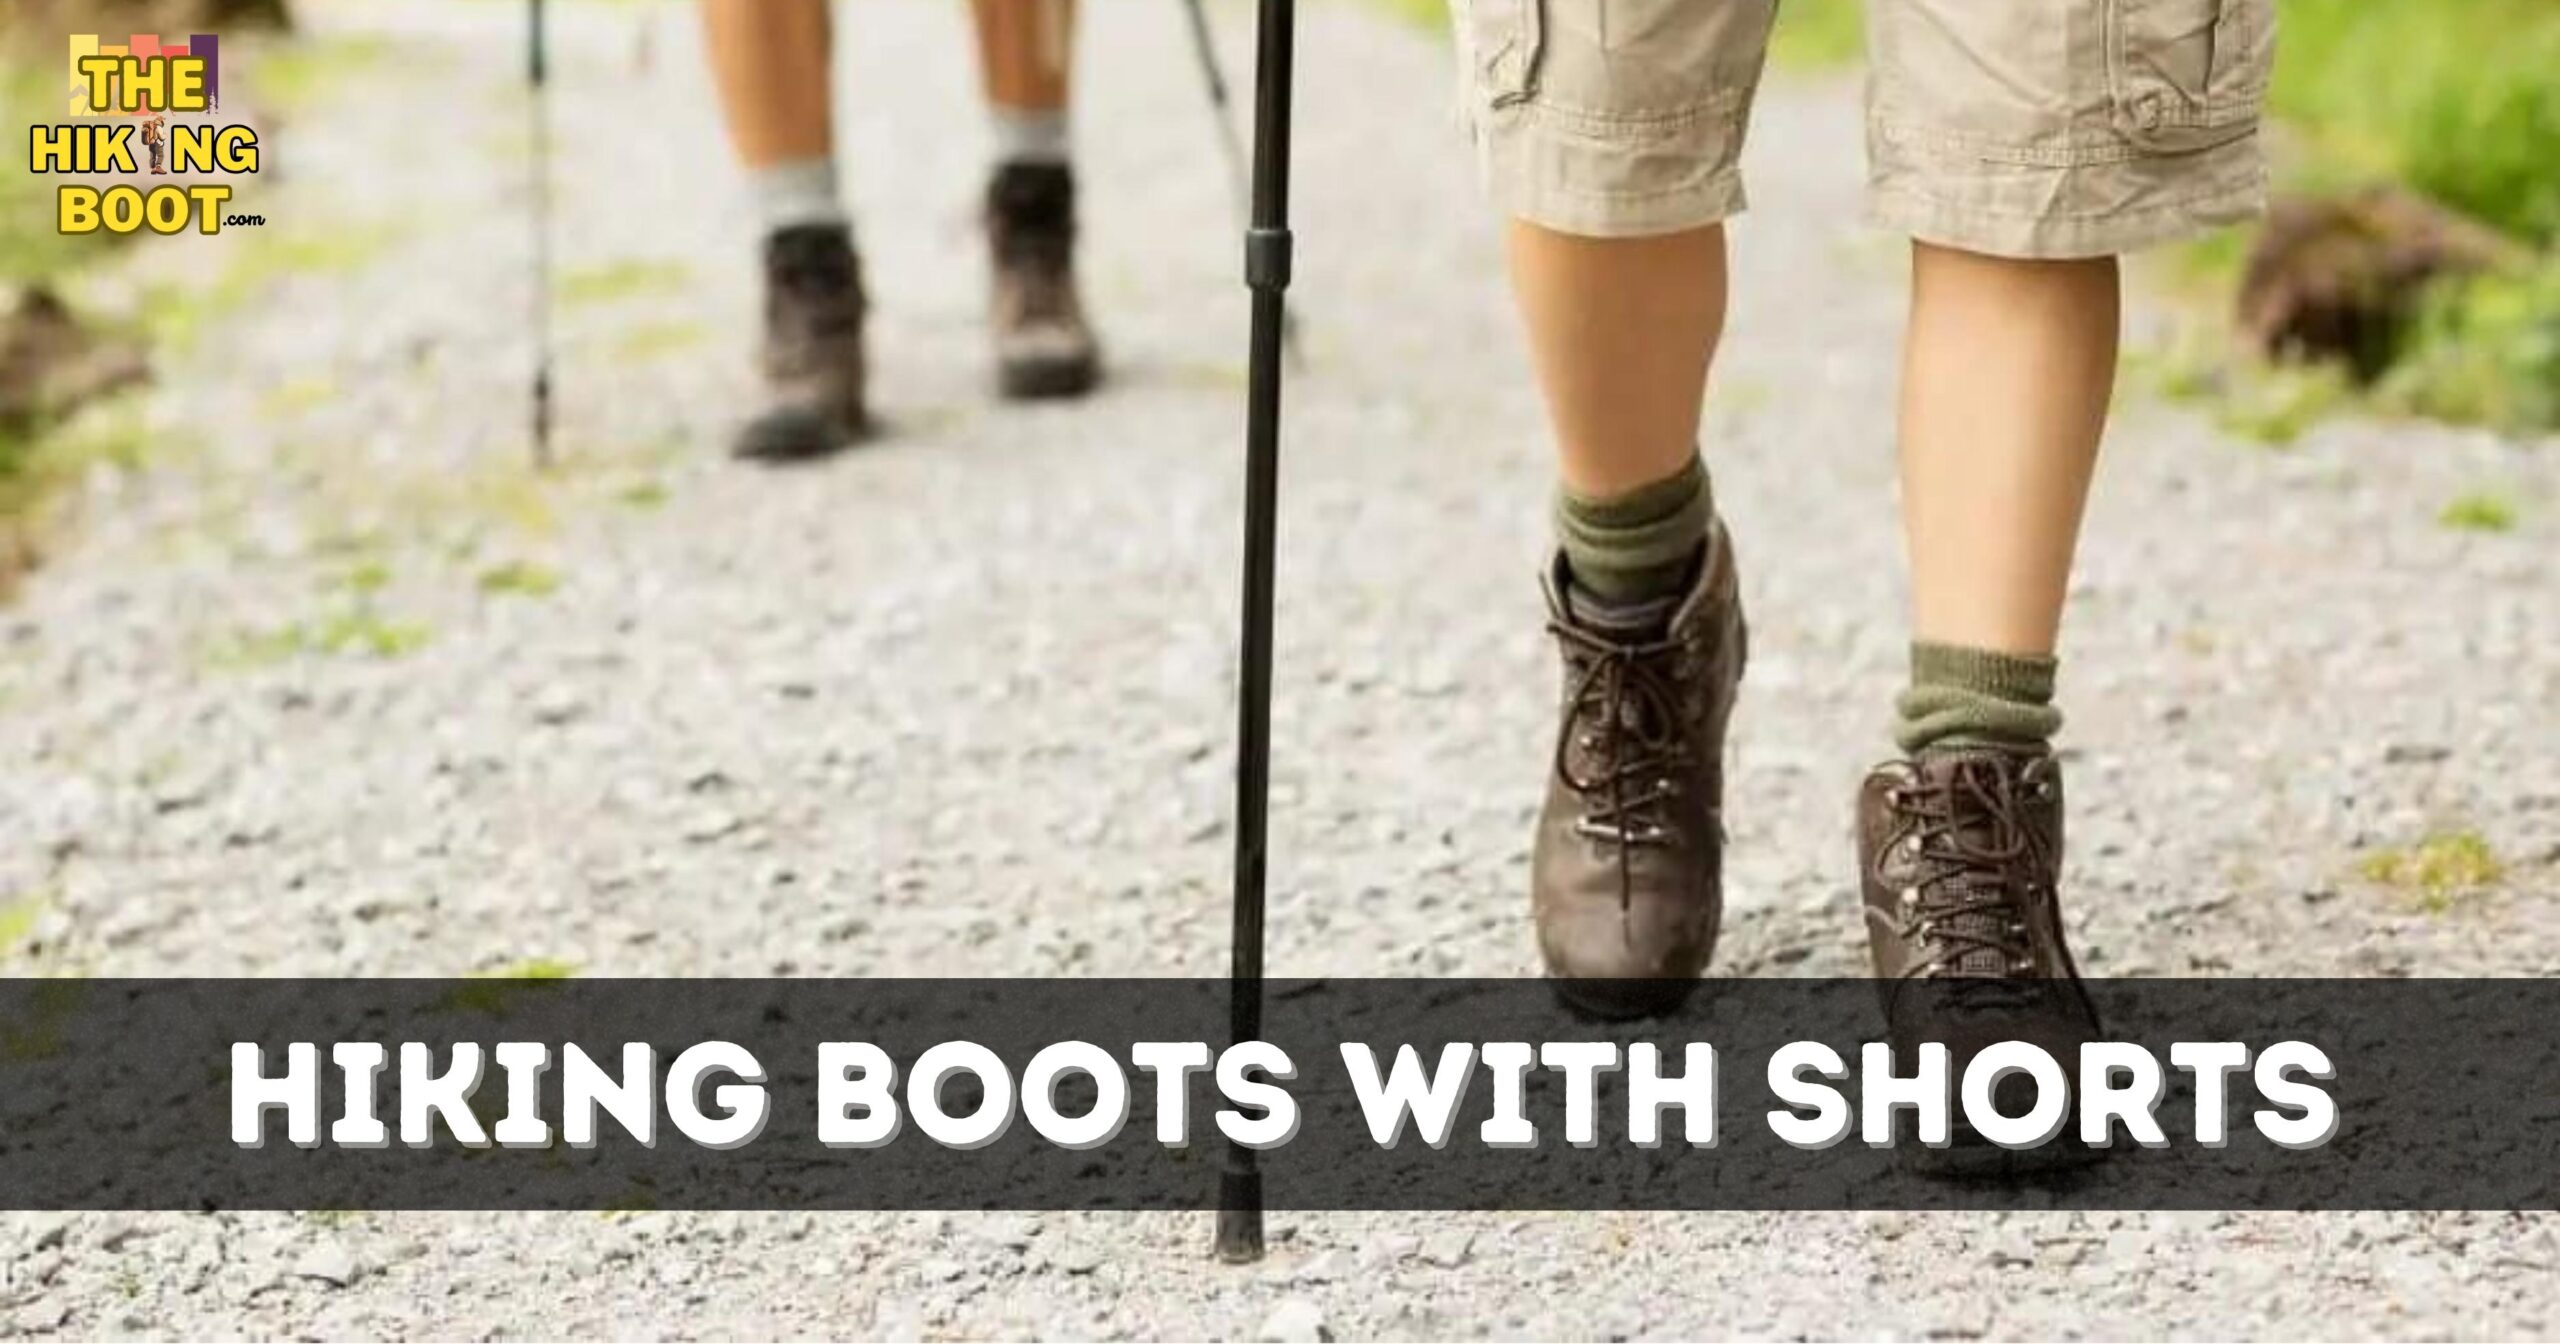 How to wear hiking boots with shorts